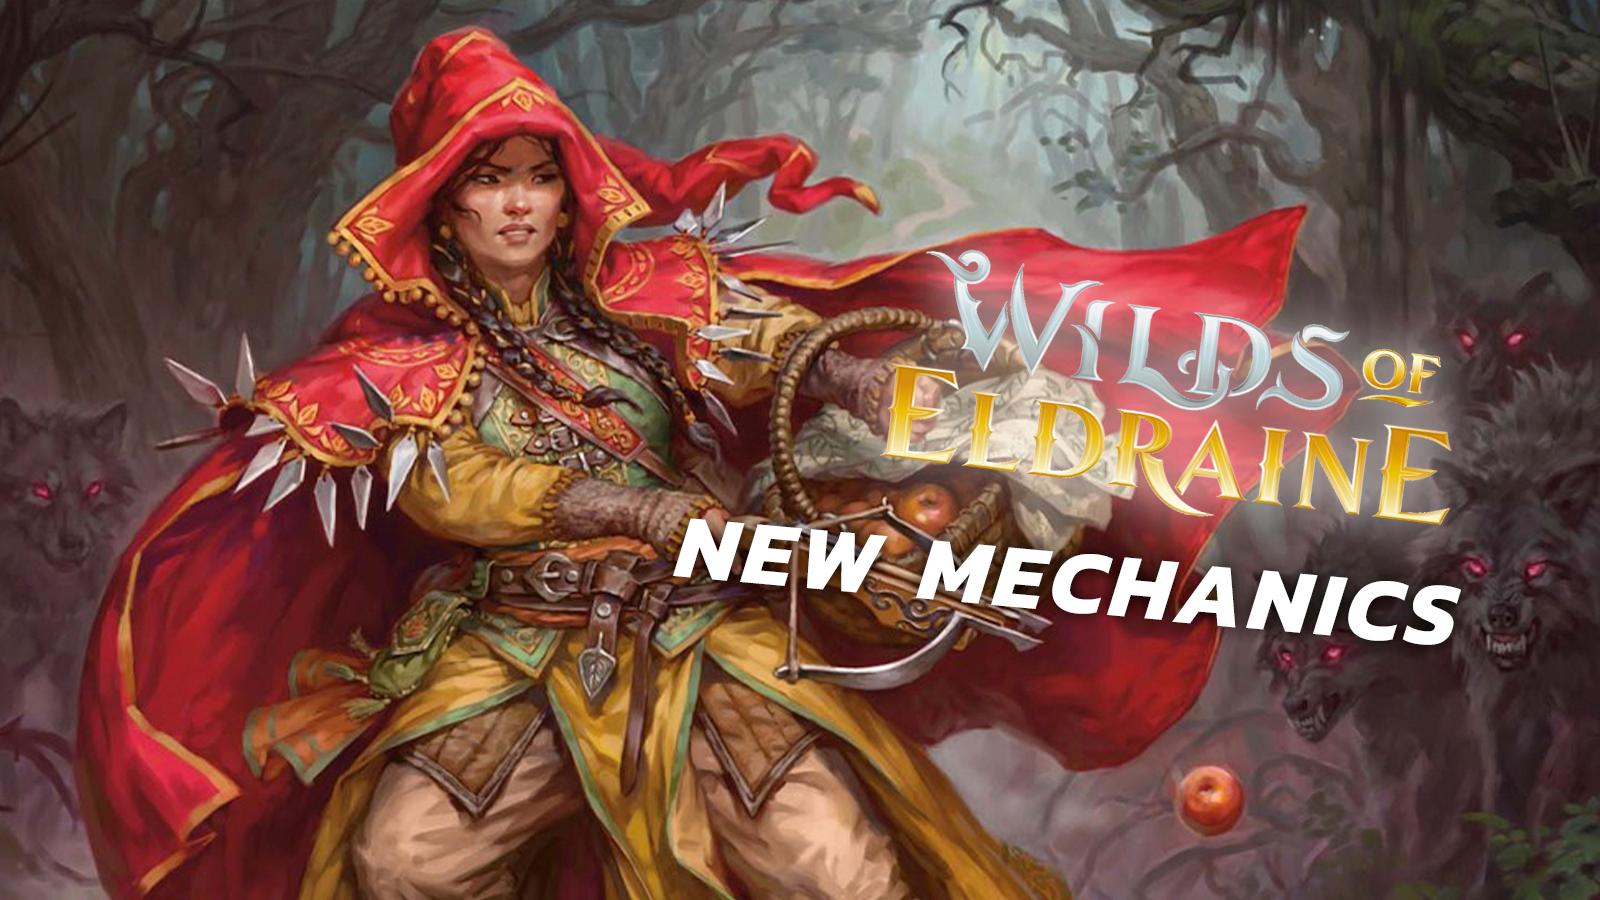 MTG Wilds of Eldraine Ruby with the logo and New Mechanics over the top